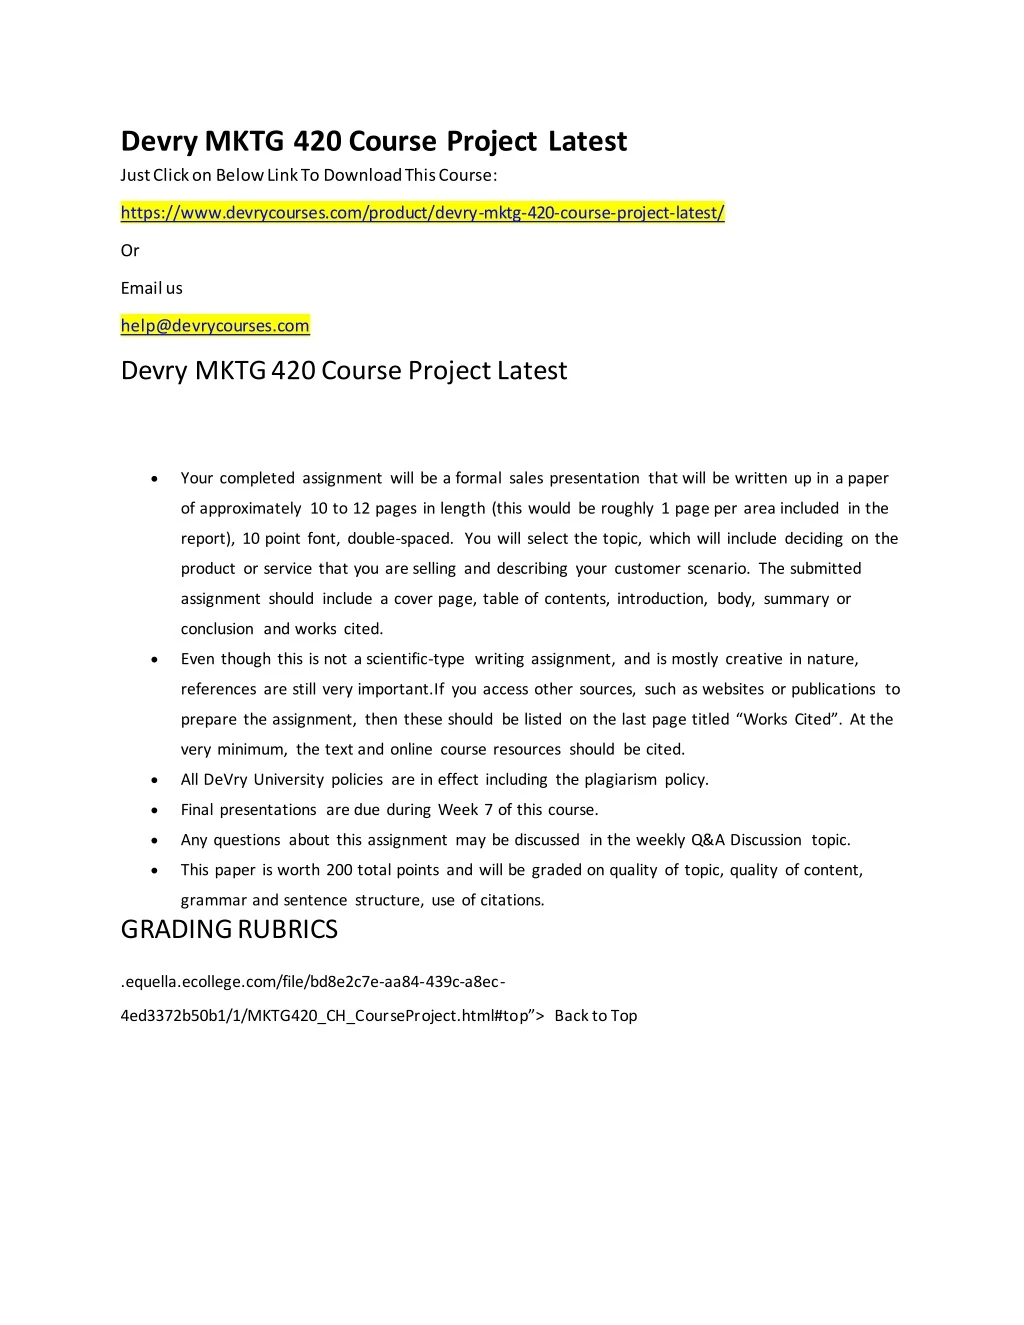 devry mktg 420 course project latest just click